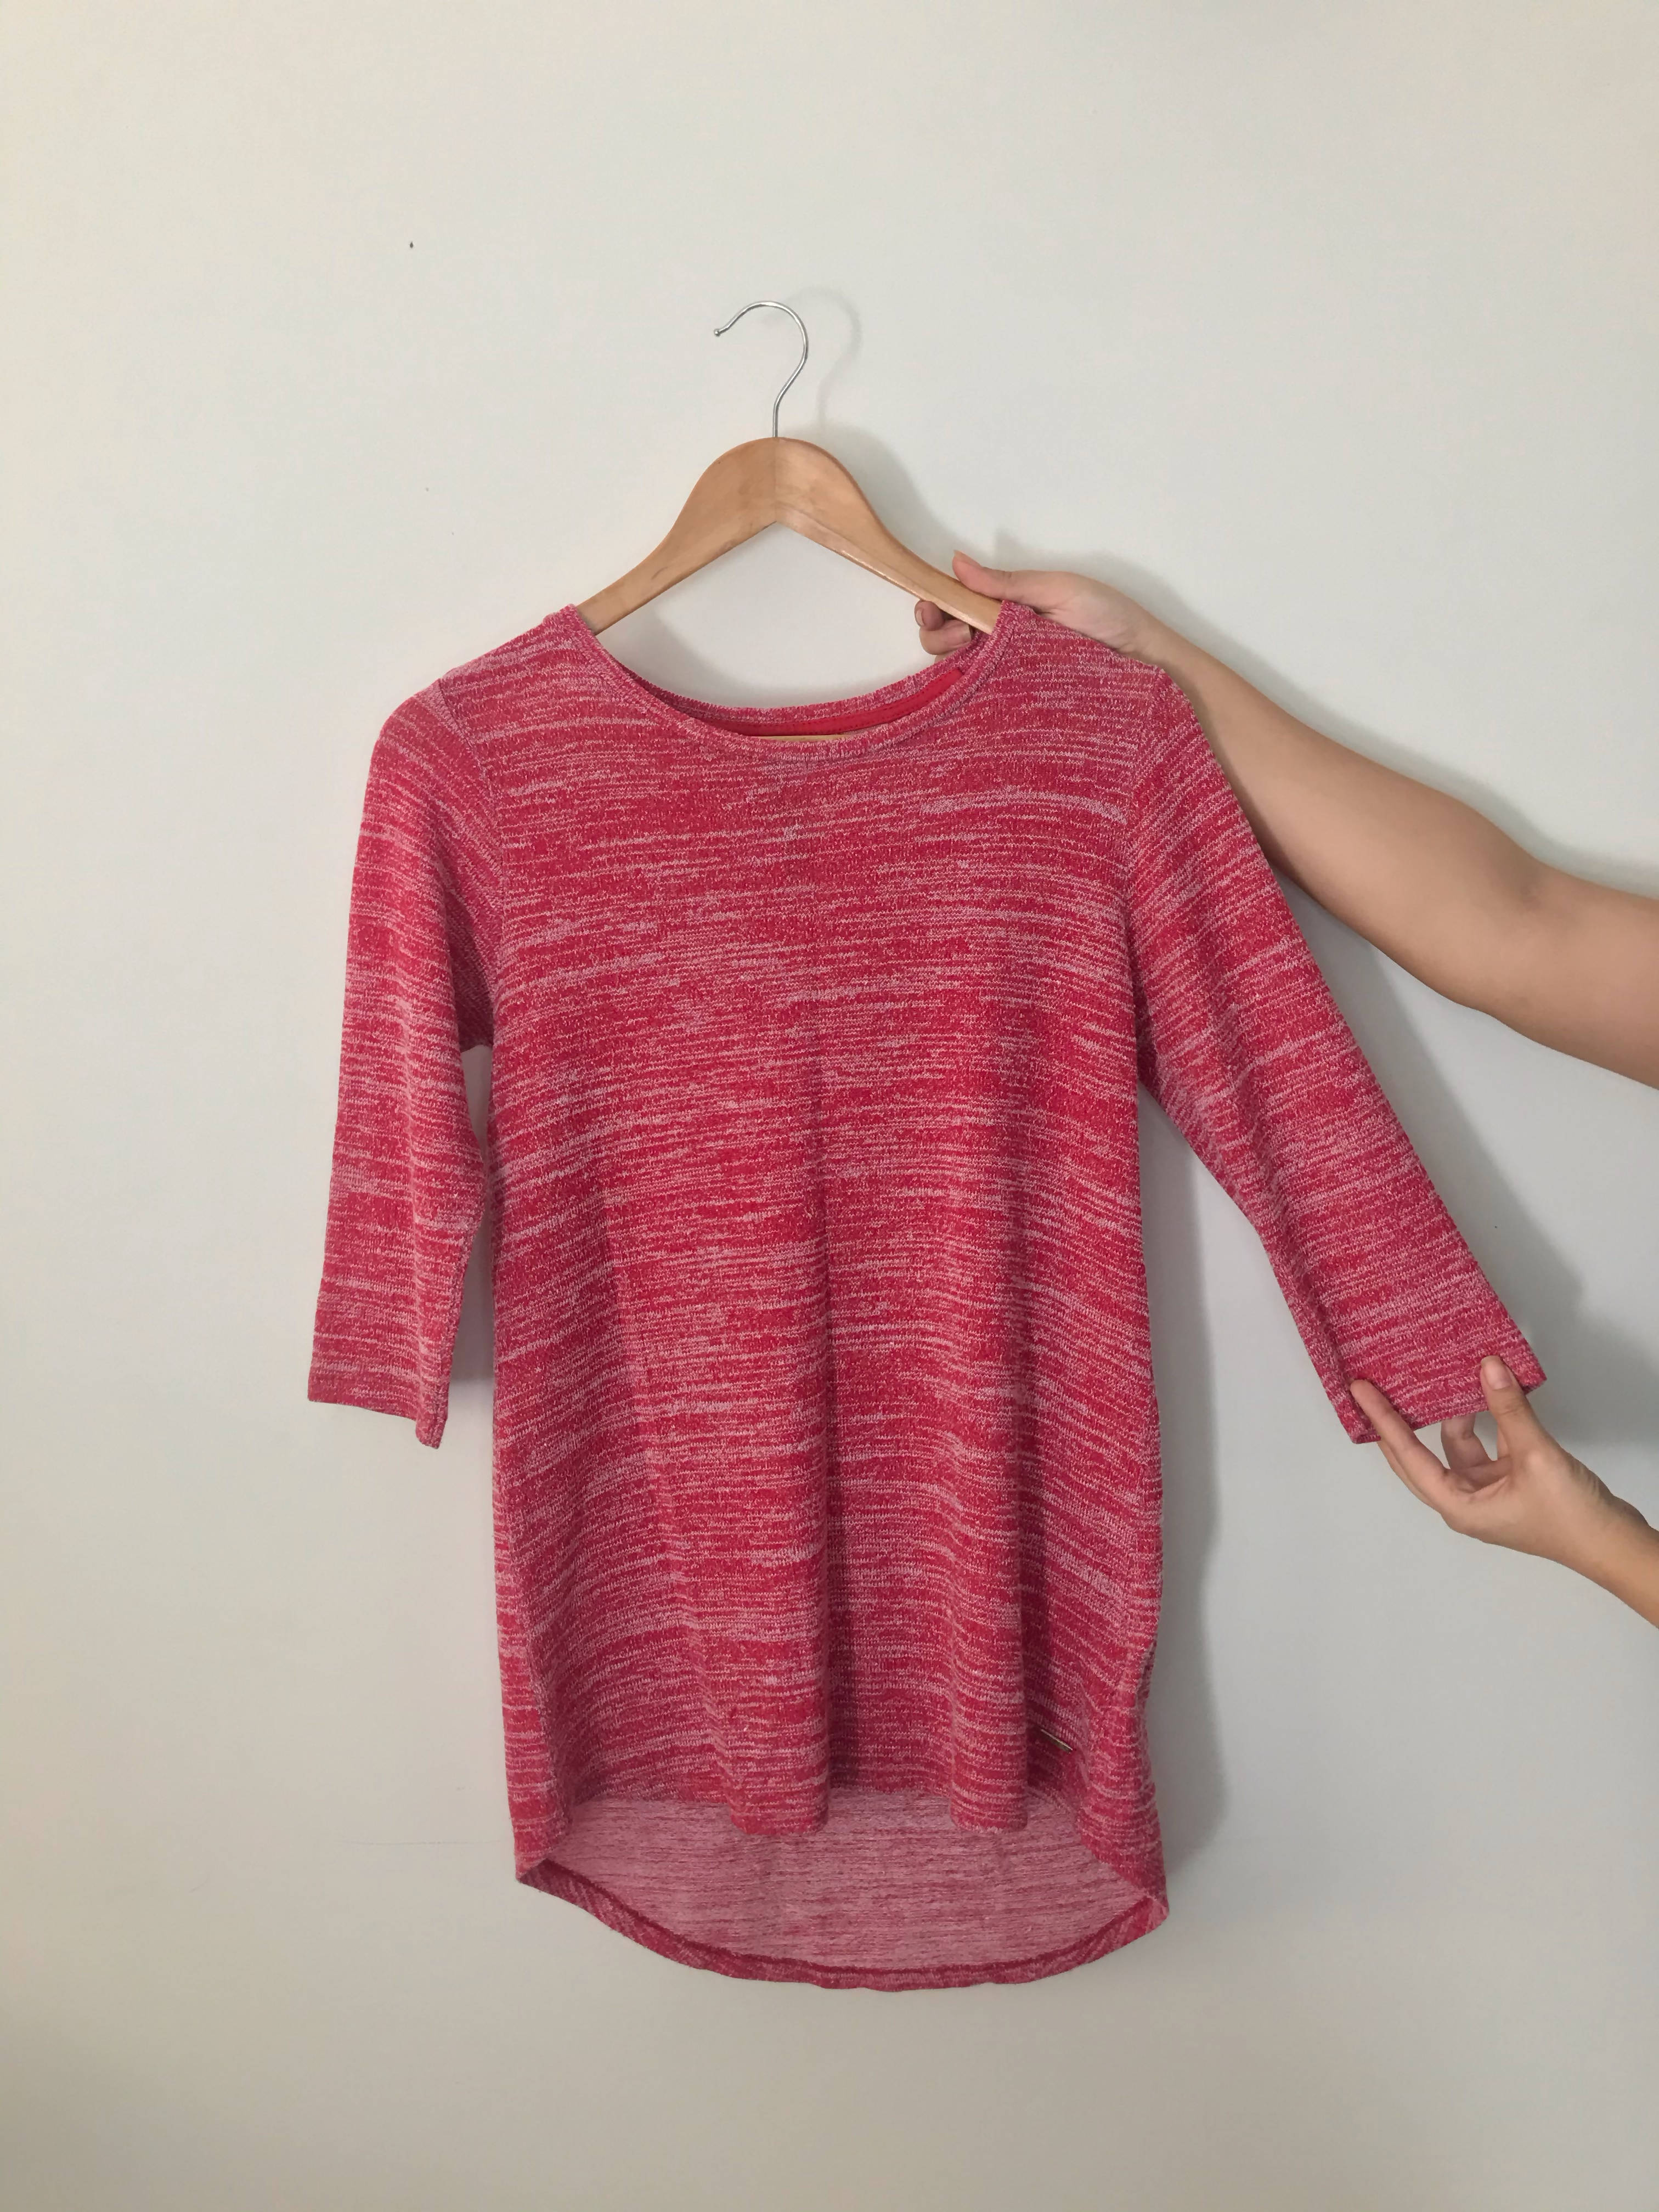 Outfitters | Pink Stretchable Too W Net Design | Women Tops & Shirts | Preloved